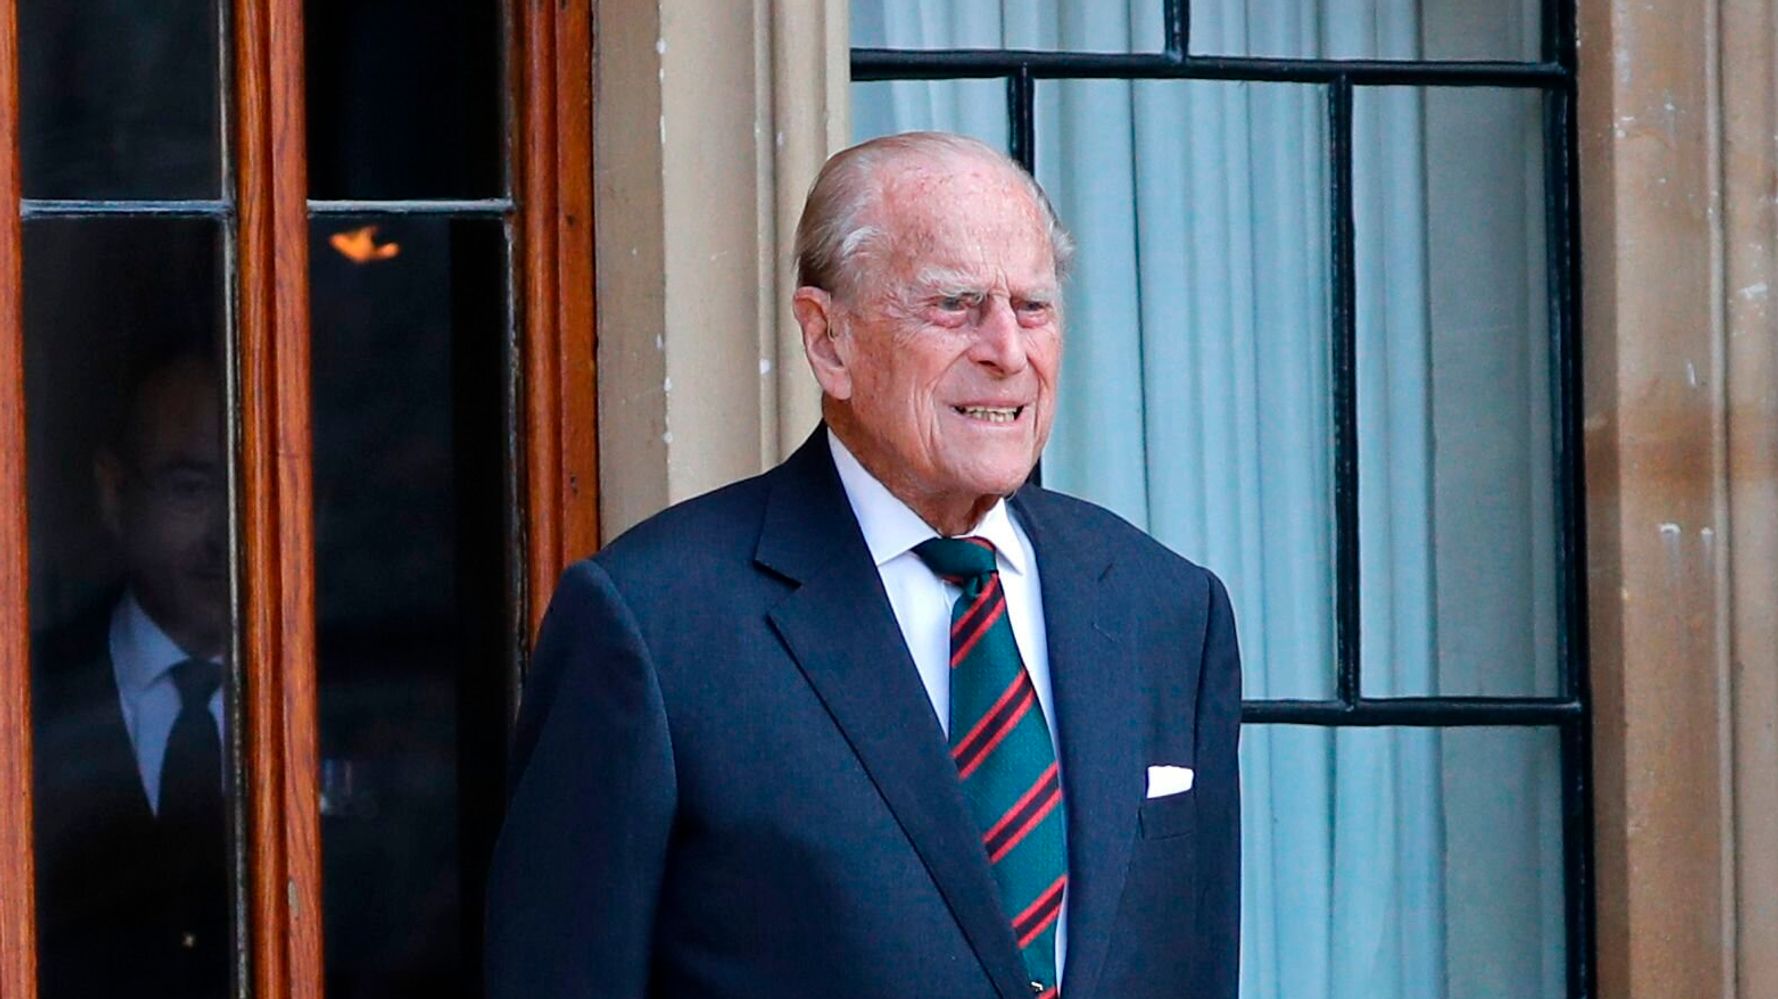 Buckingham Palace gives an update on the condition of Prince Philip